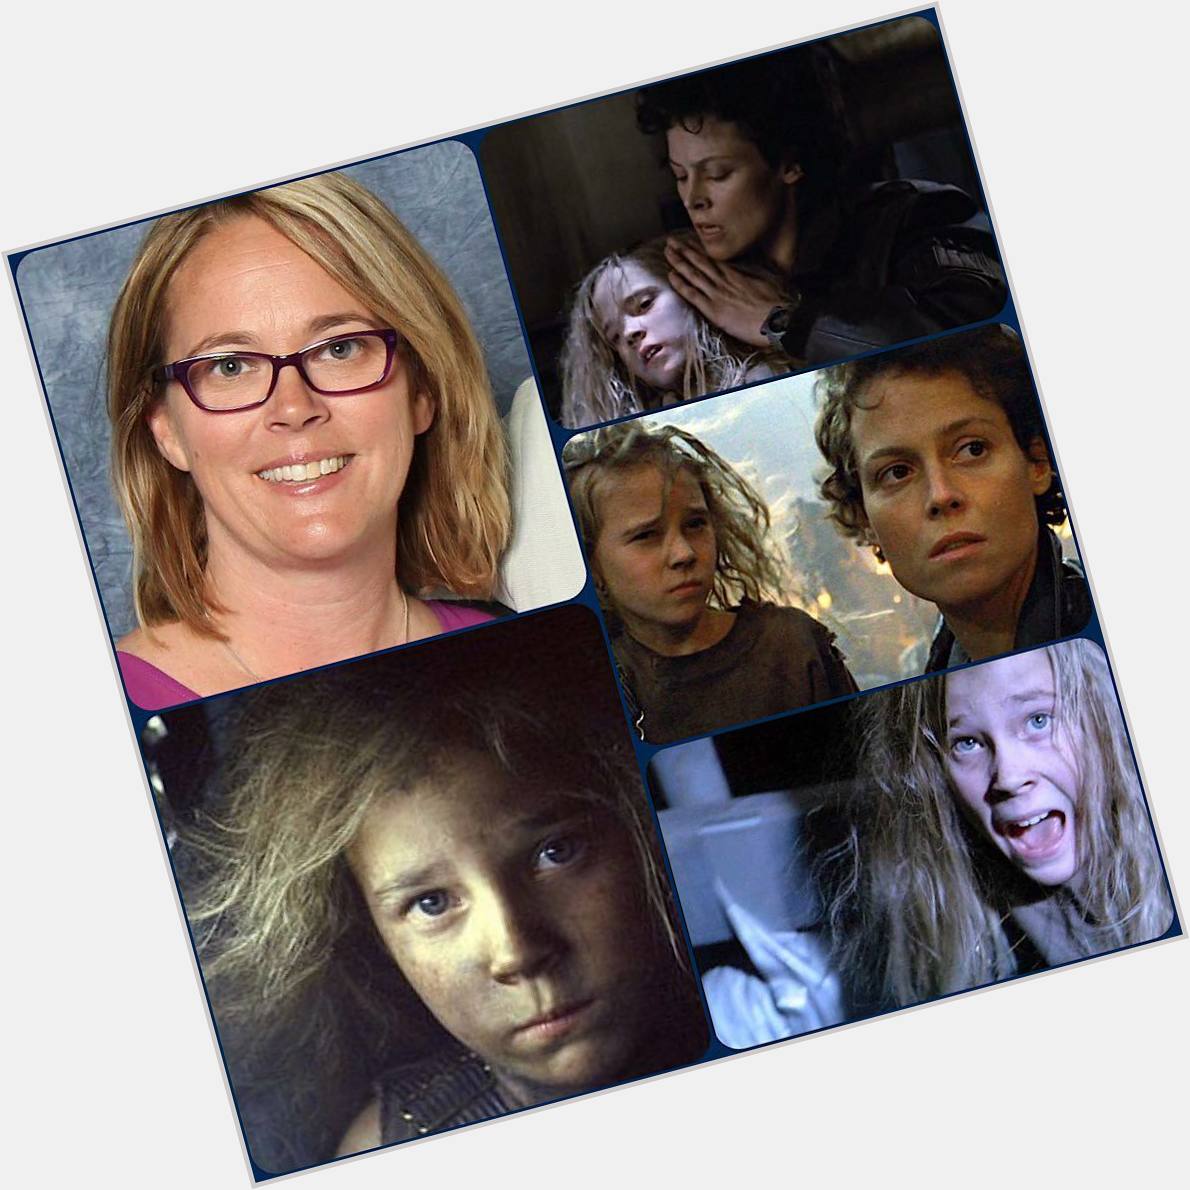 Happy Birthday Carrie Henn, who played Newt in 